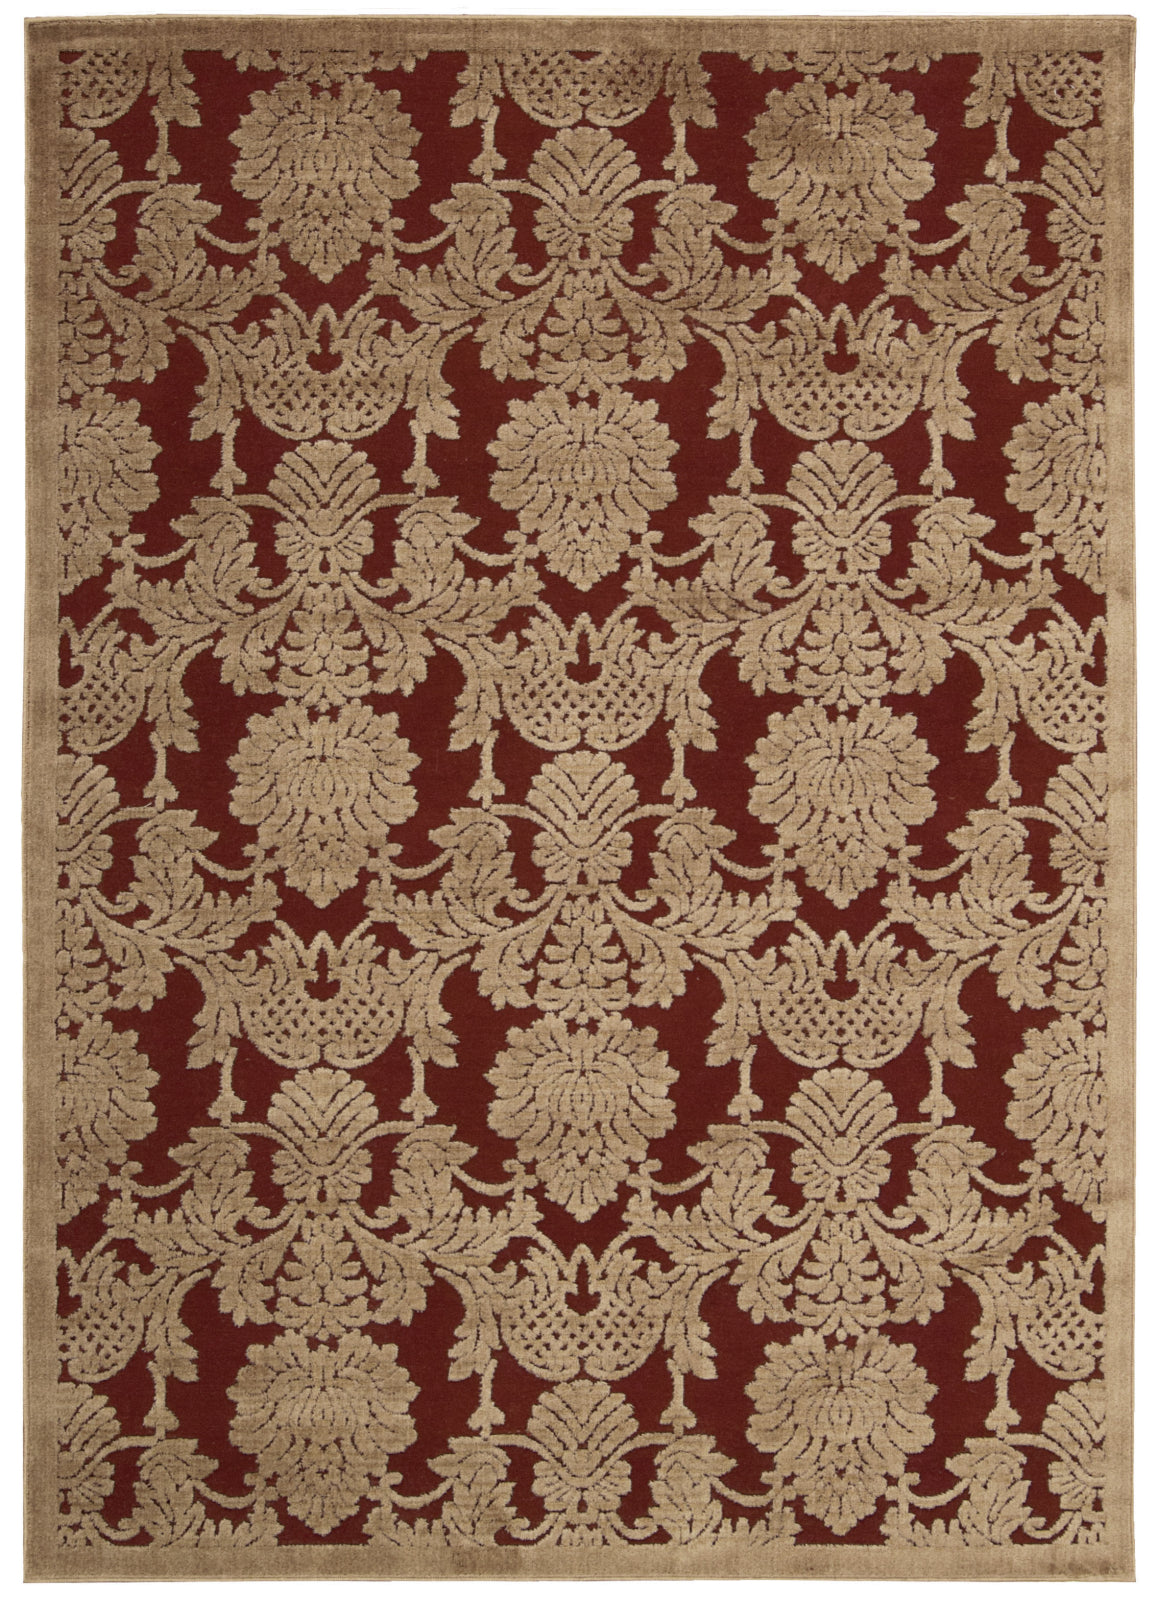 Nourison Graphic Illusions GIL03 Red Area Rug main image